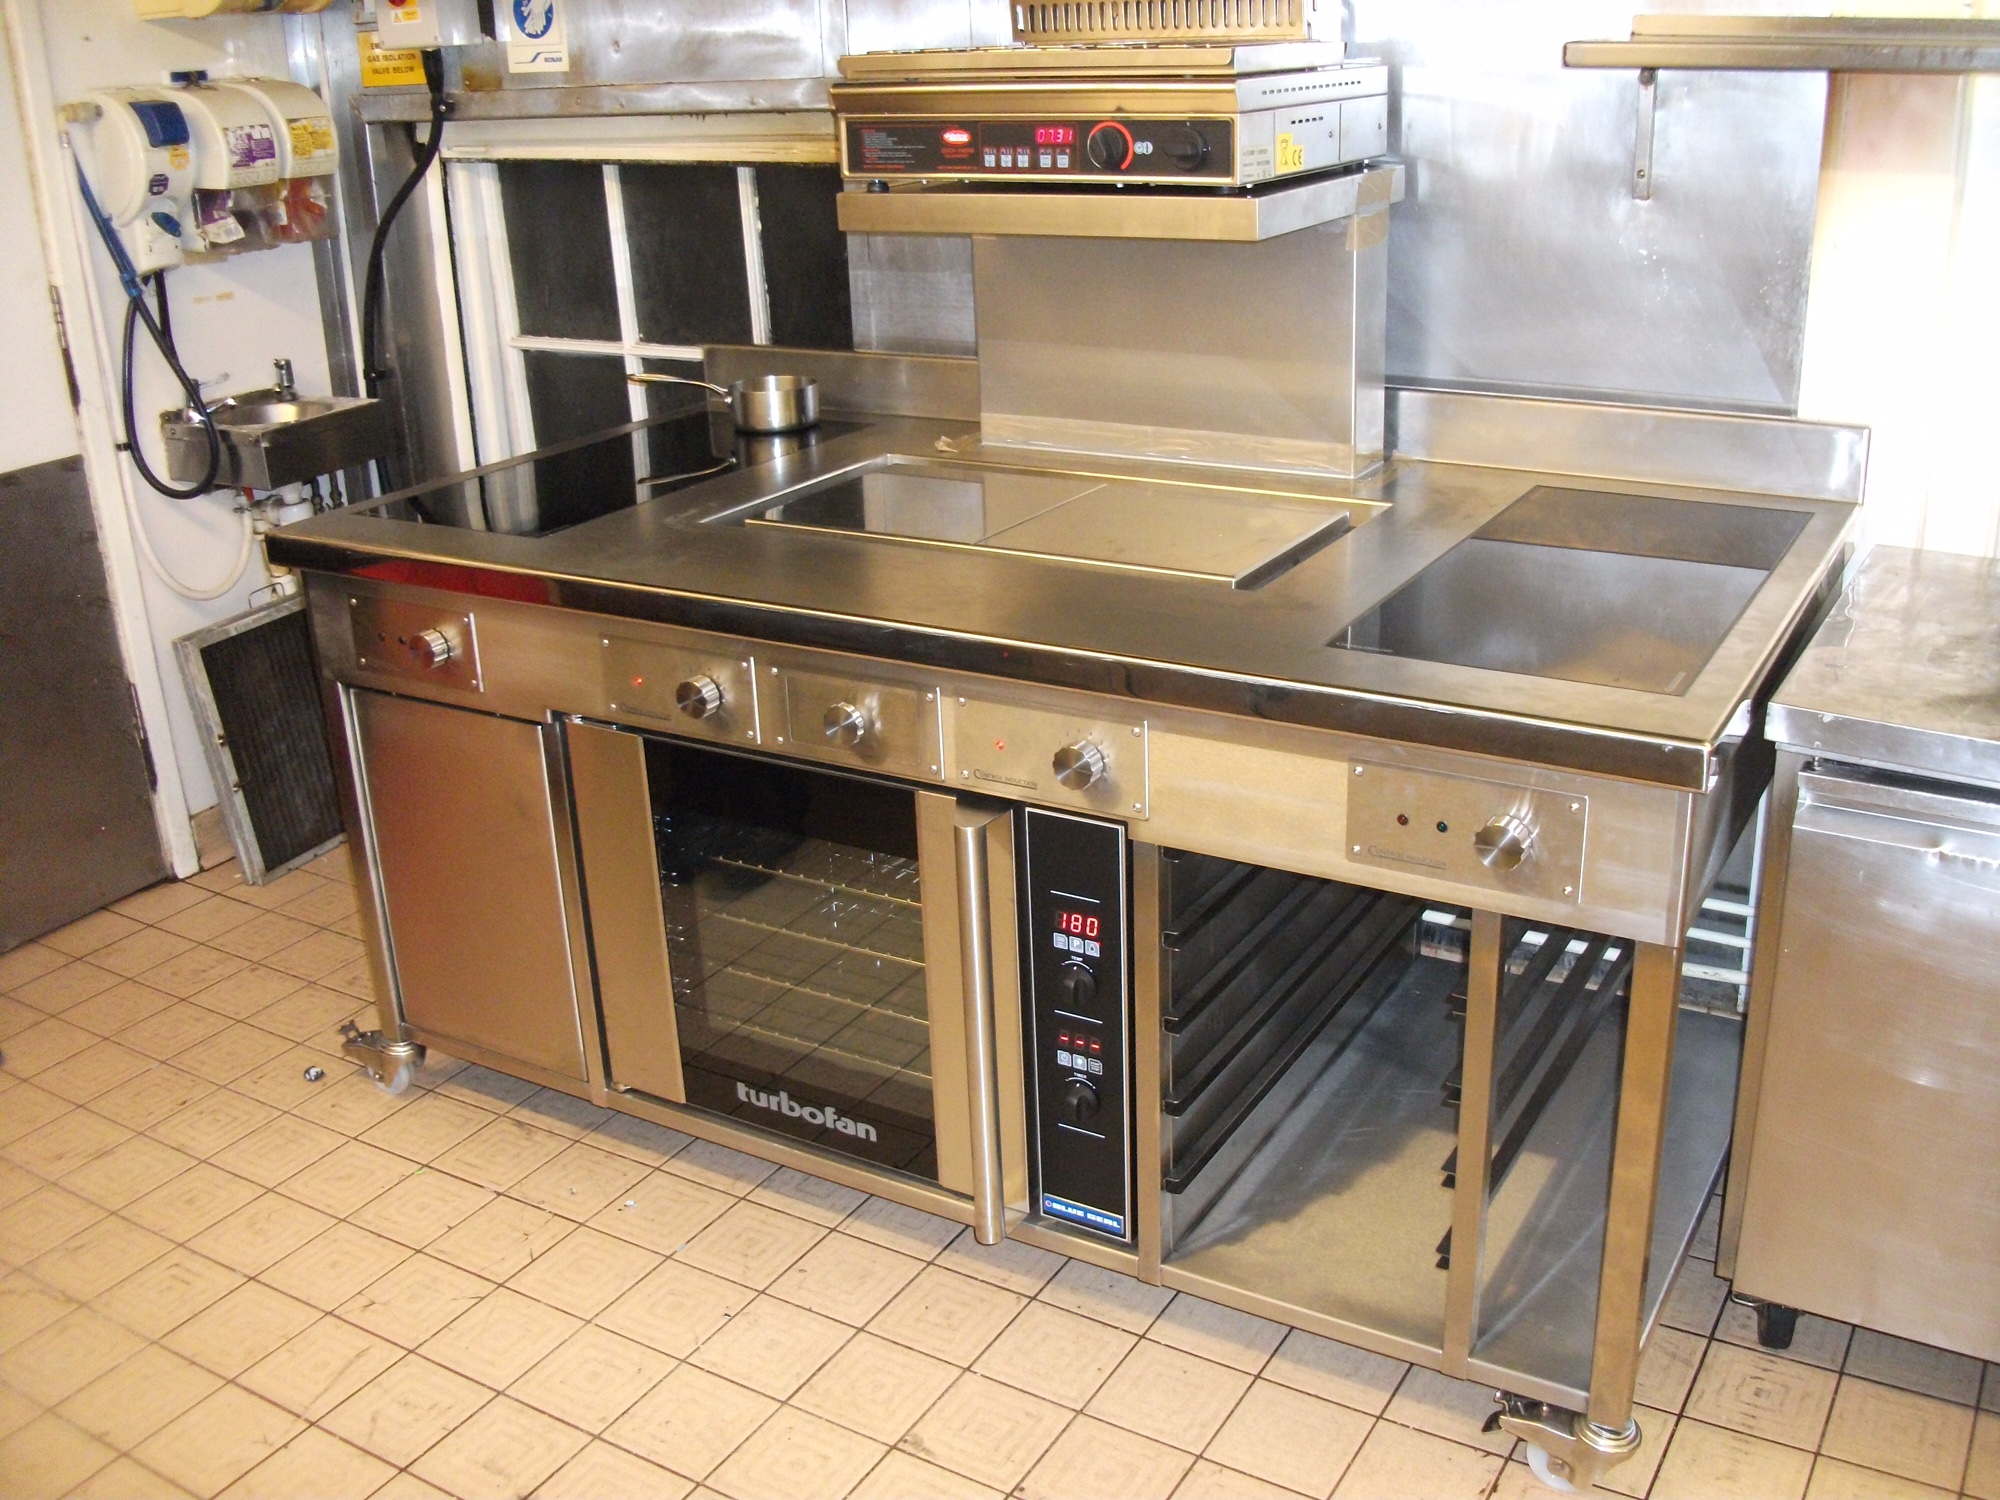 Induction cooking suite with Sliders double plancha and oven